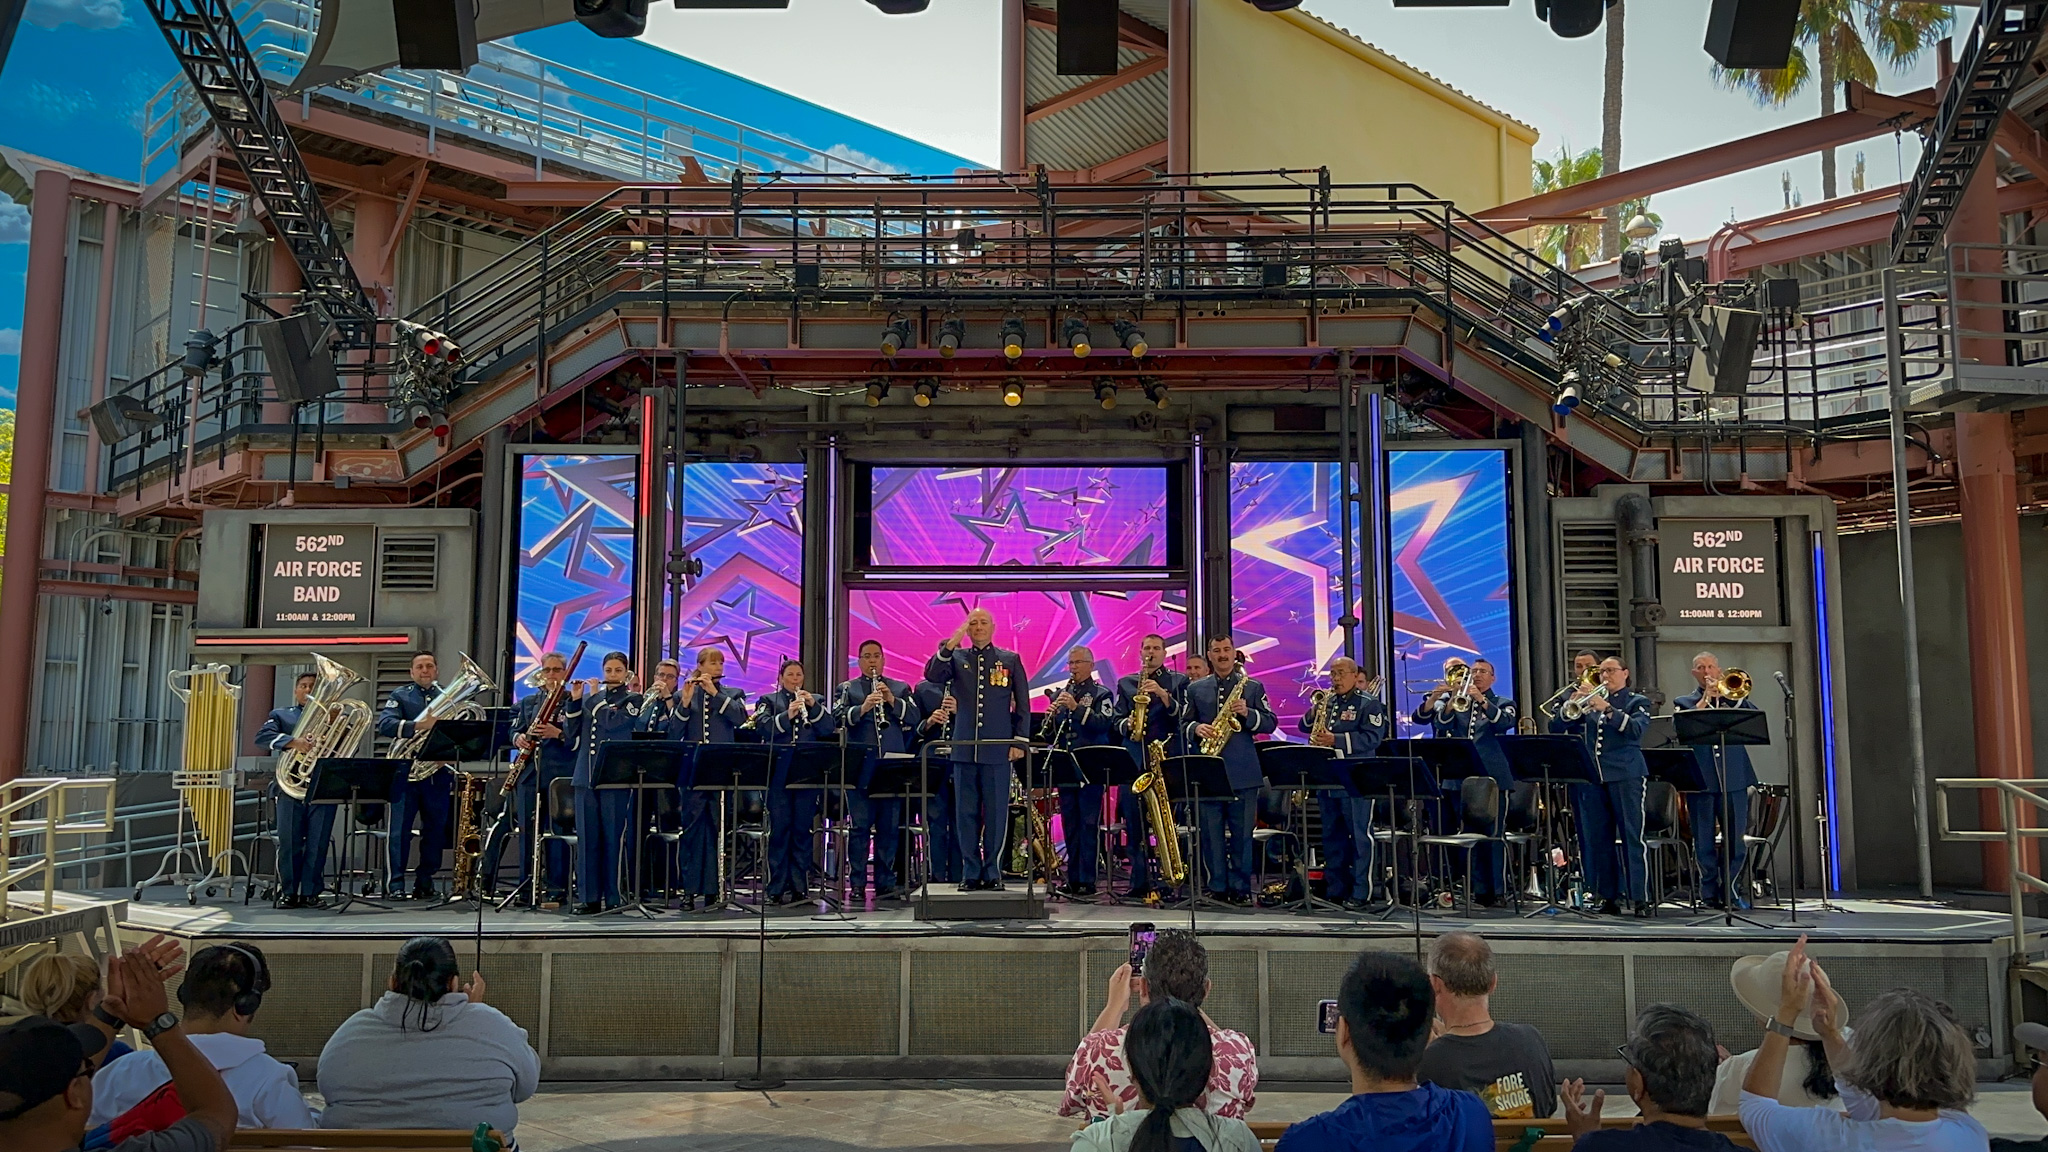 The 562nd Air Force Band Brings Added Patriotism to Disneyland Resort for 4th of July Celebration